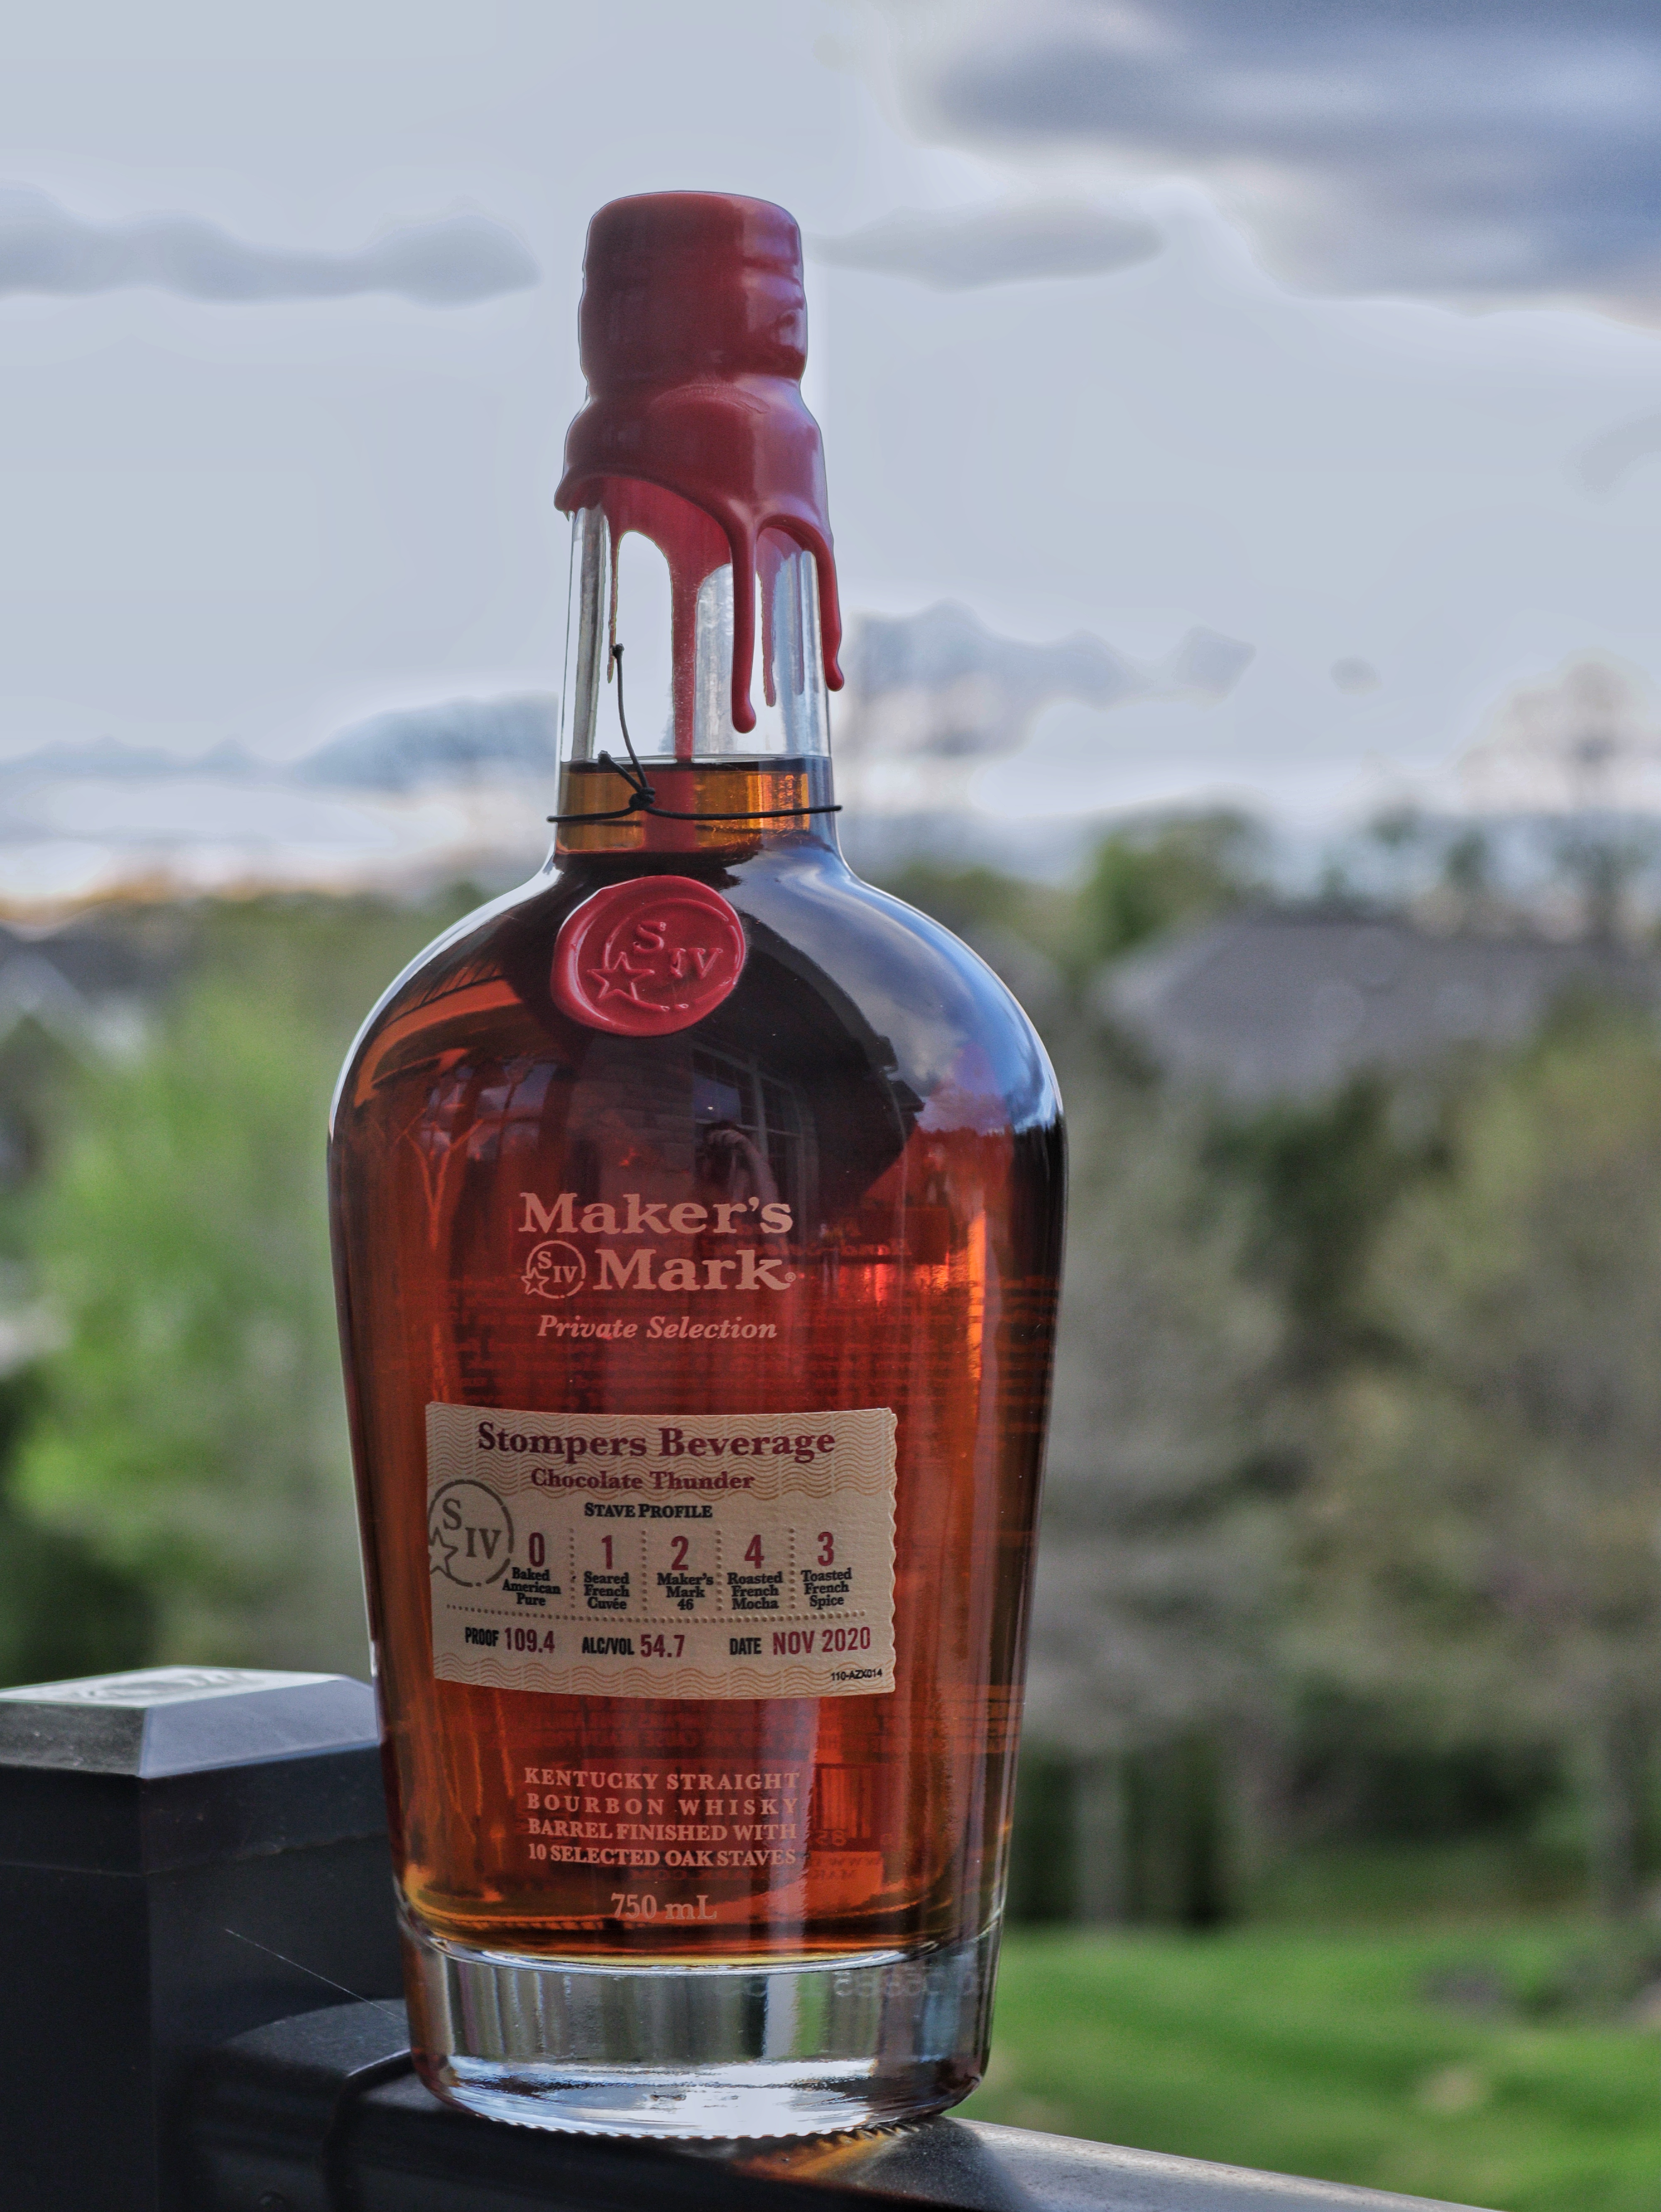 Sipping A Maker’s Mark Private Barrel Pick – Chocolate Thunder